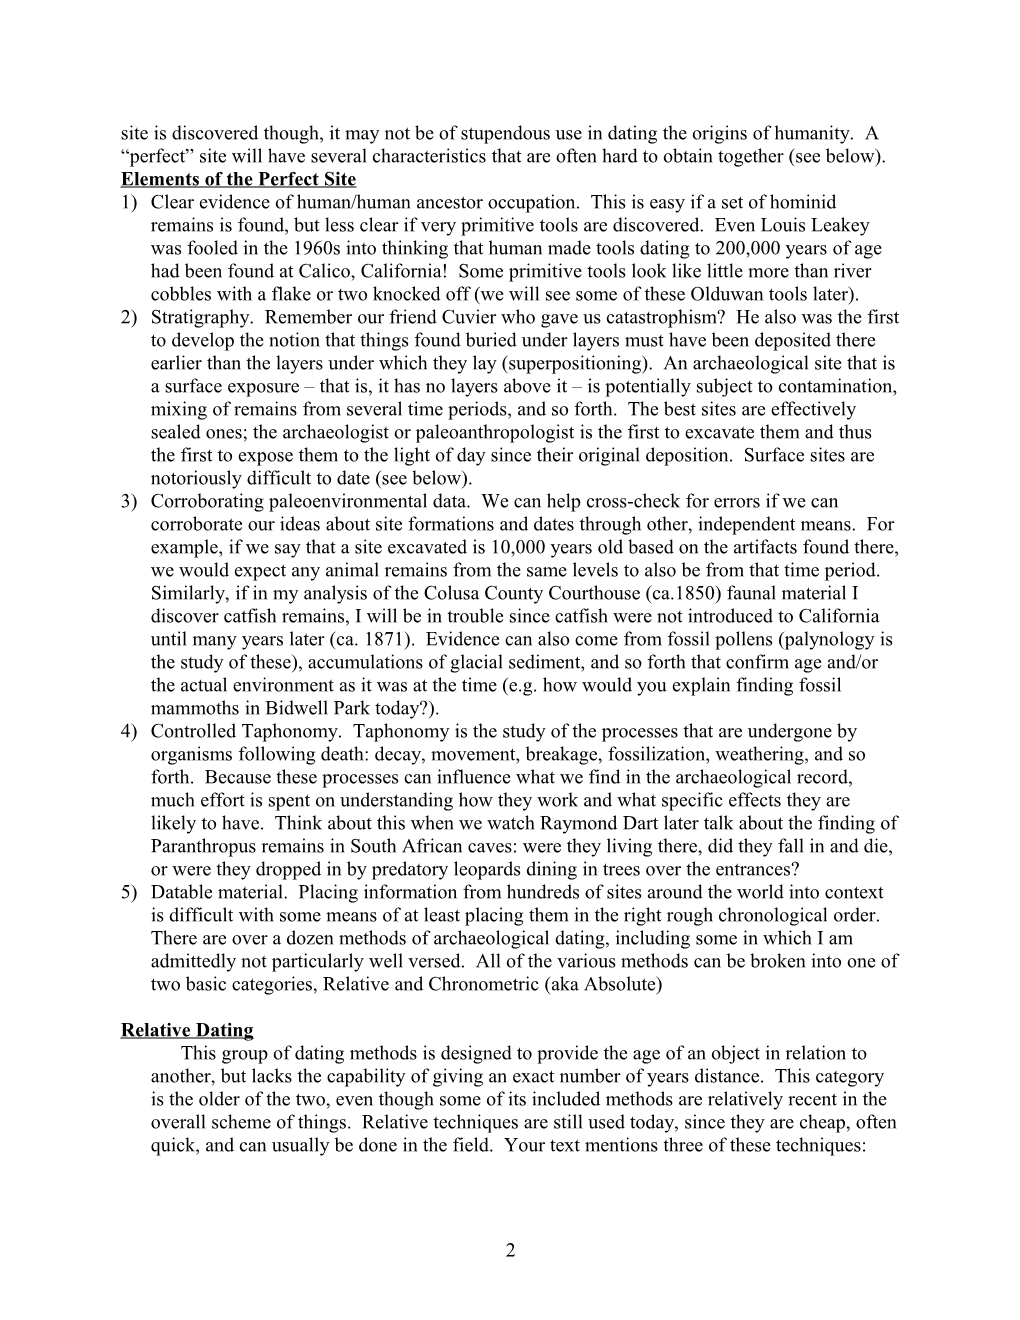 Survey of Physical Anthropology: Expanded Lecture Notes (Dating)